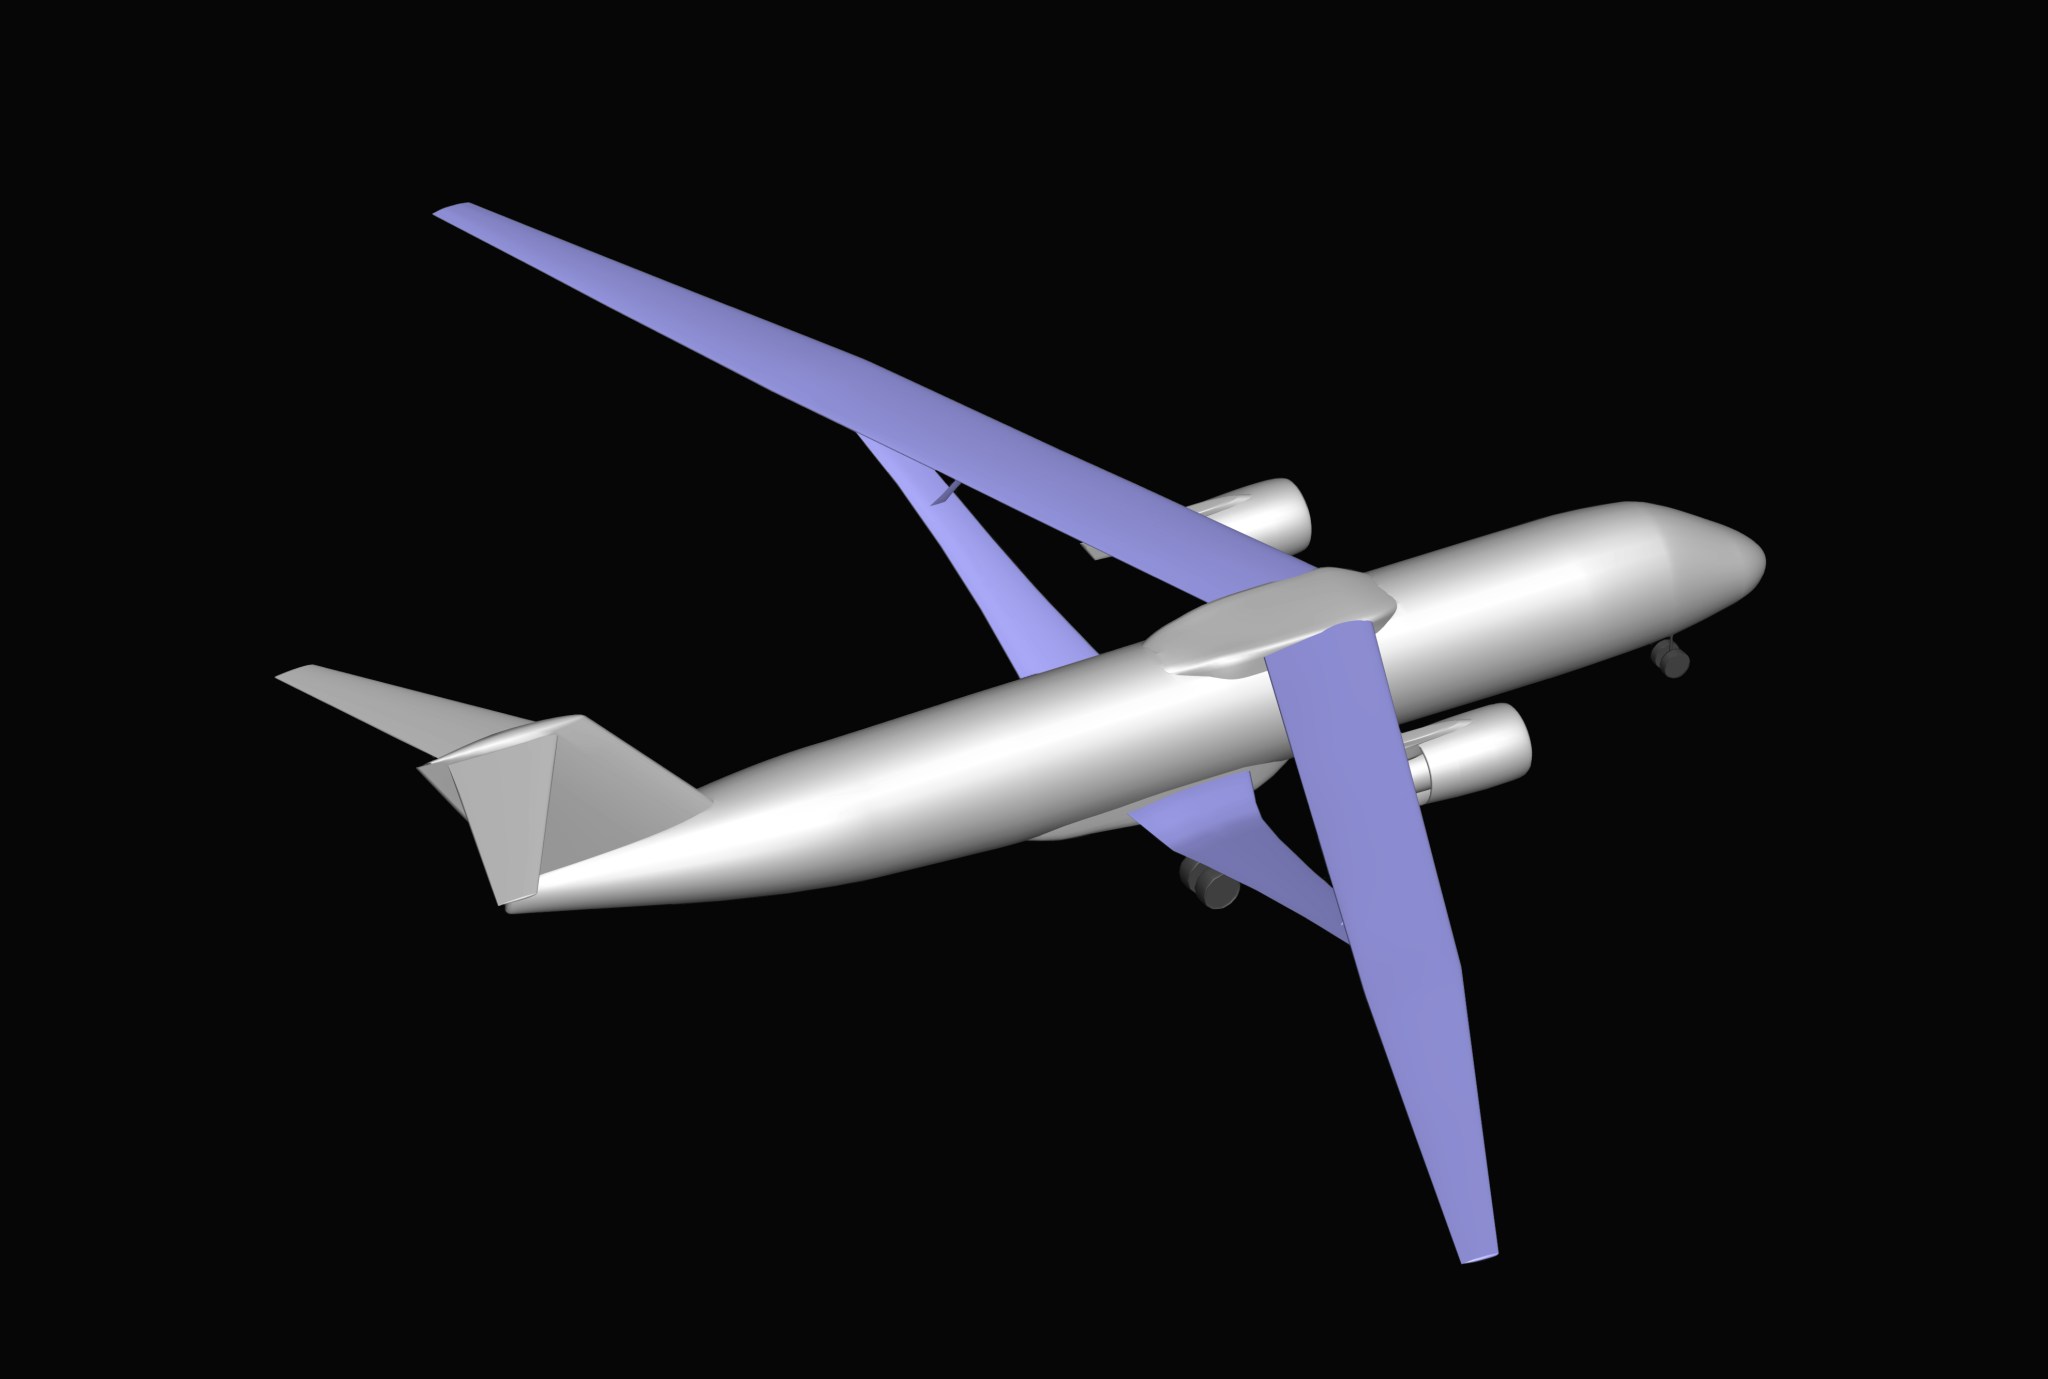 Top down view of a computer generated image showing an airplane with a silver body, T-shaped tail, and twin jet engines on a purple wing that is longer and skinnier than today's typical airliners.